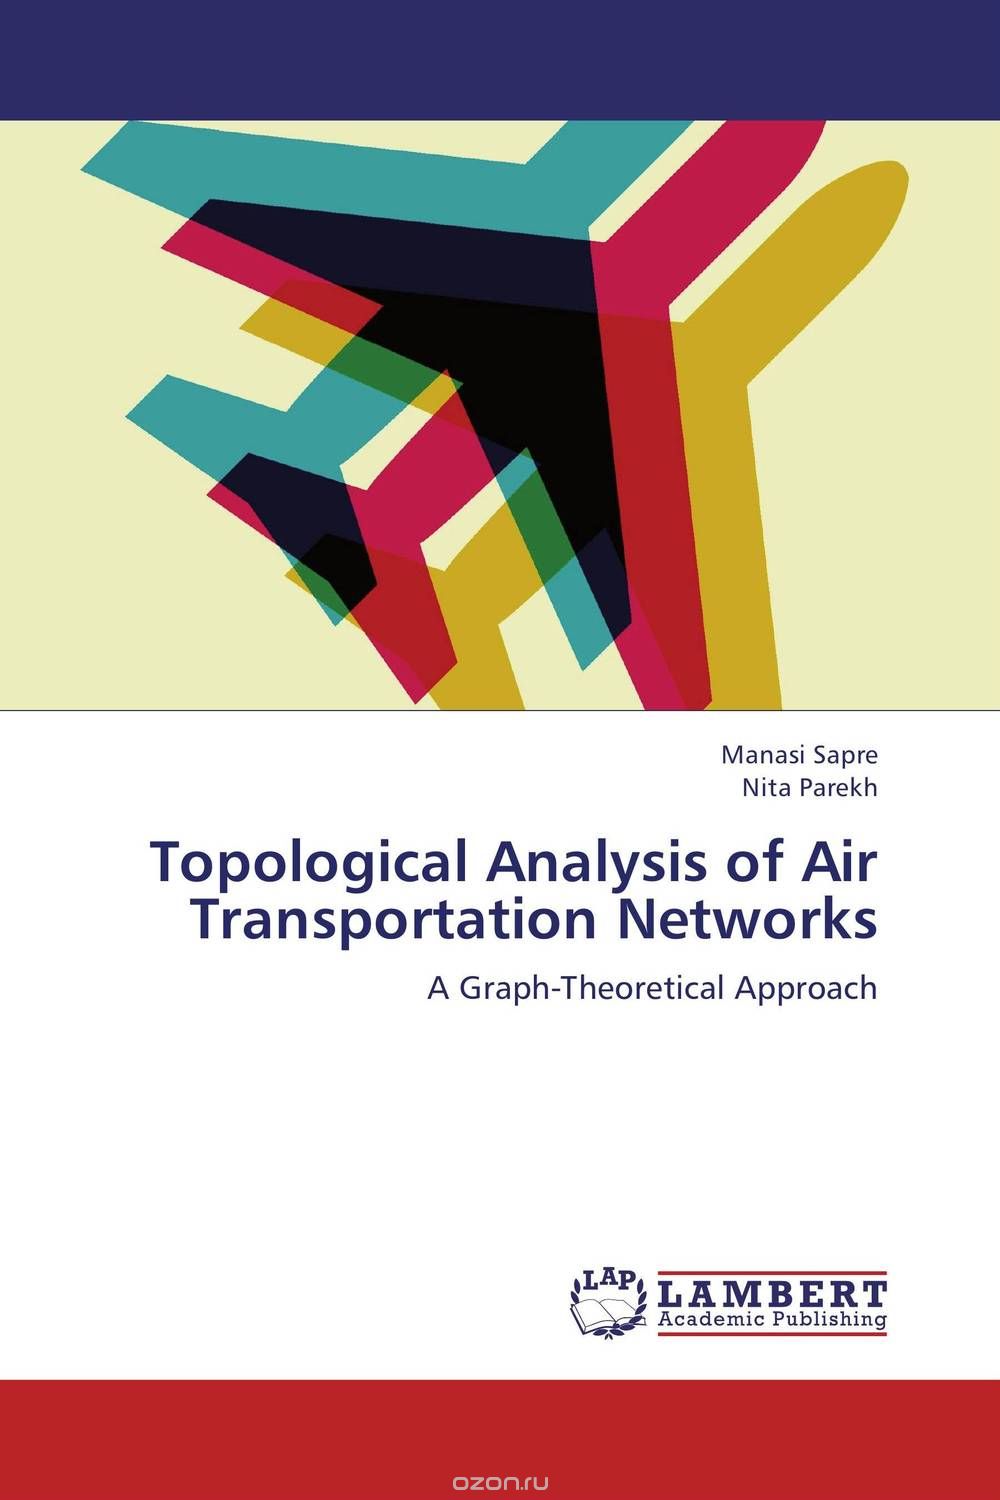 Topological Analysis of Air Transportation Networks